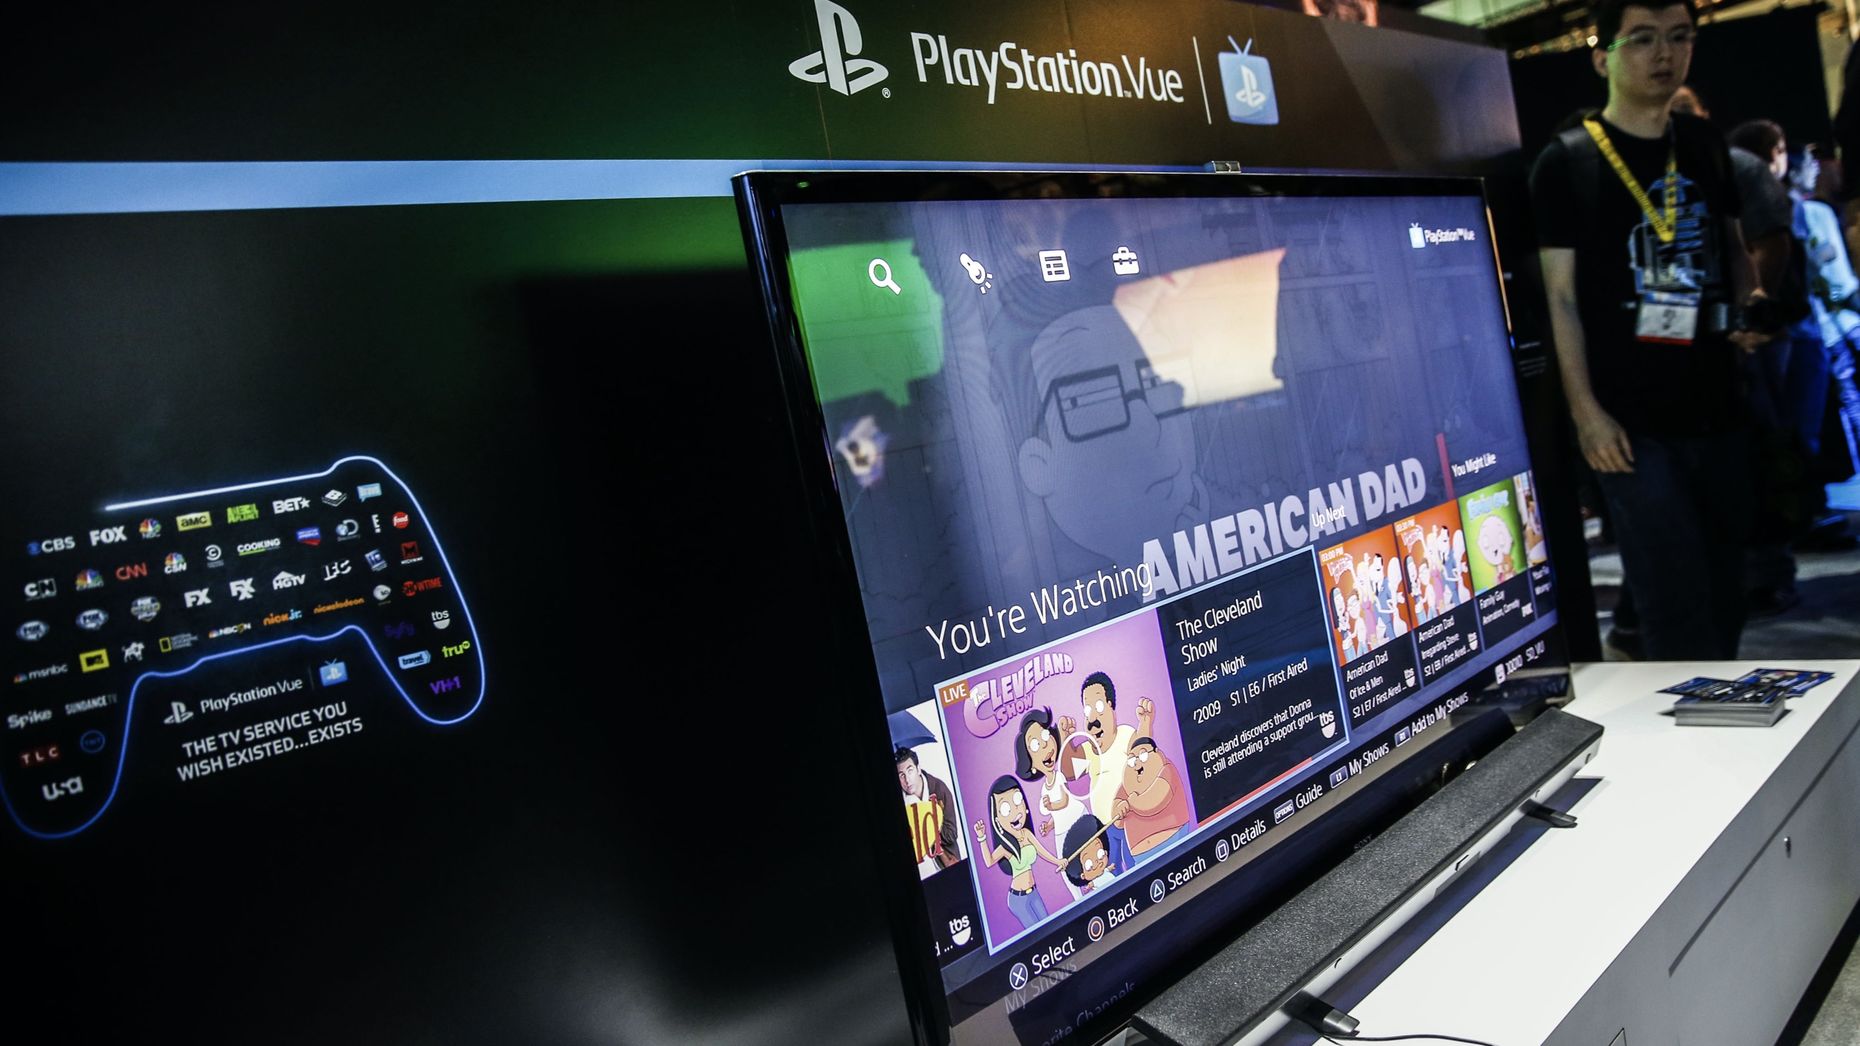 Sony is reportedly exploring the sale of its PlayStation Vue Internet TV service